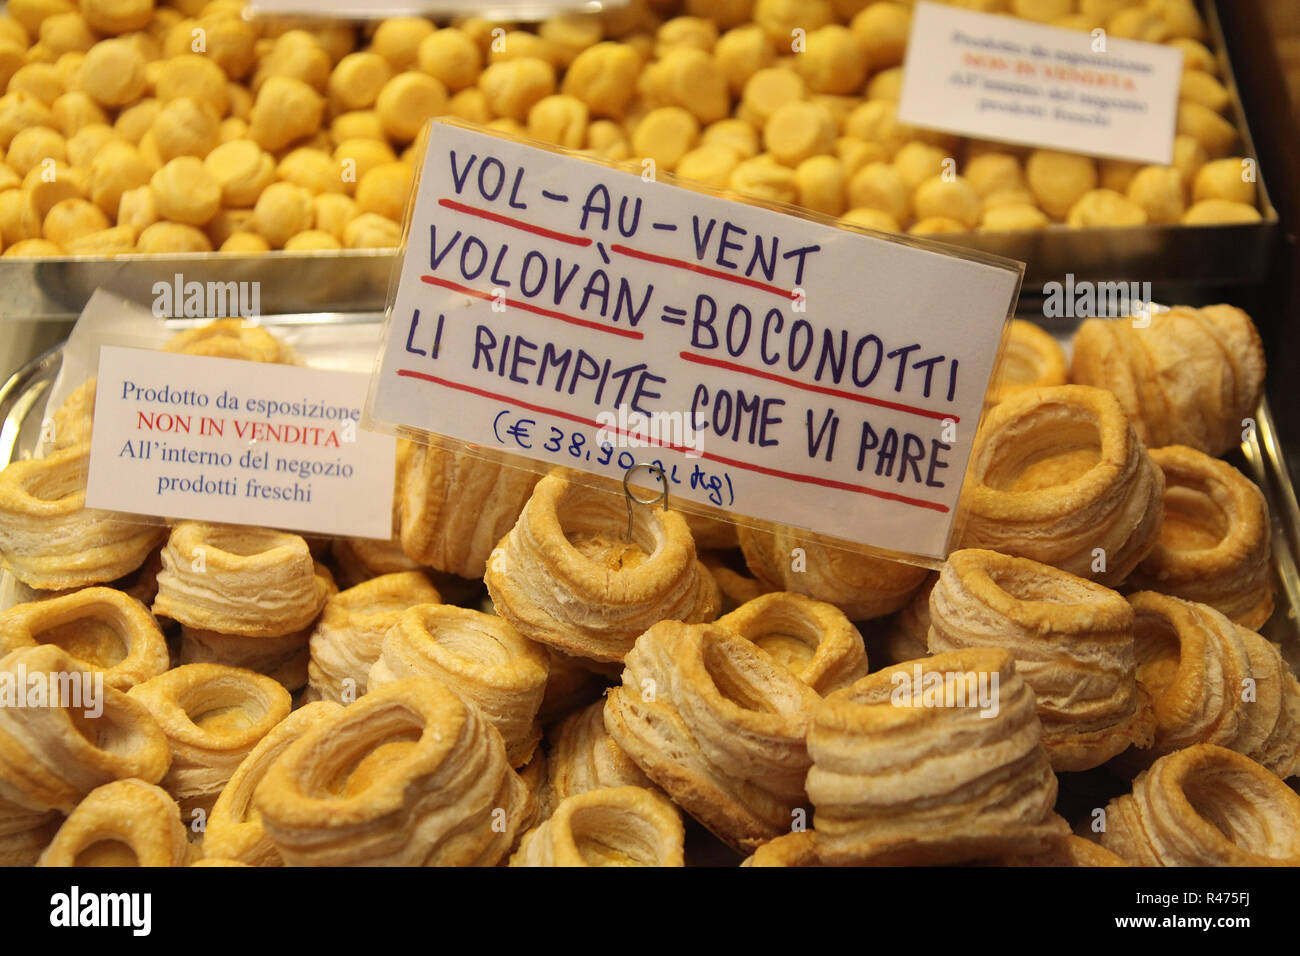 Vol-au-Vents in Bologna angezeigt Stockfoto